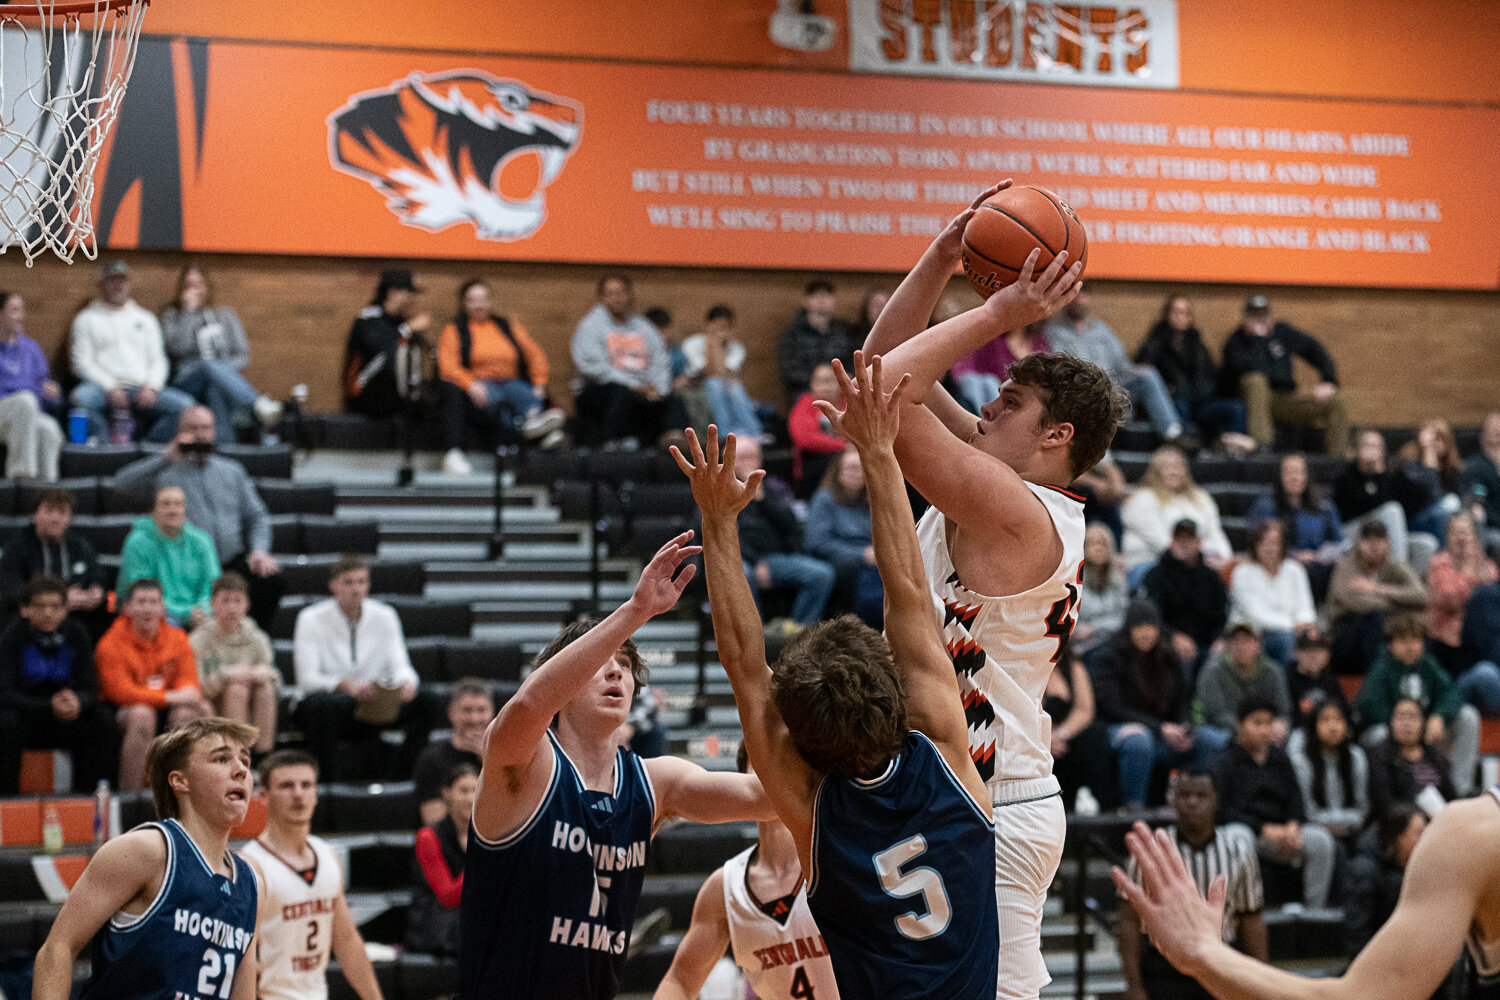 David Daarud shoots over two defenders during Centralia's loss against Hockinson on Nov. 27.